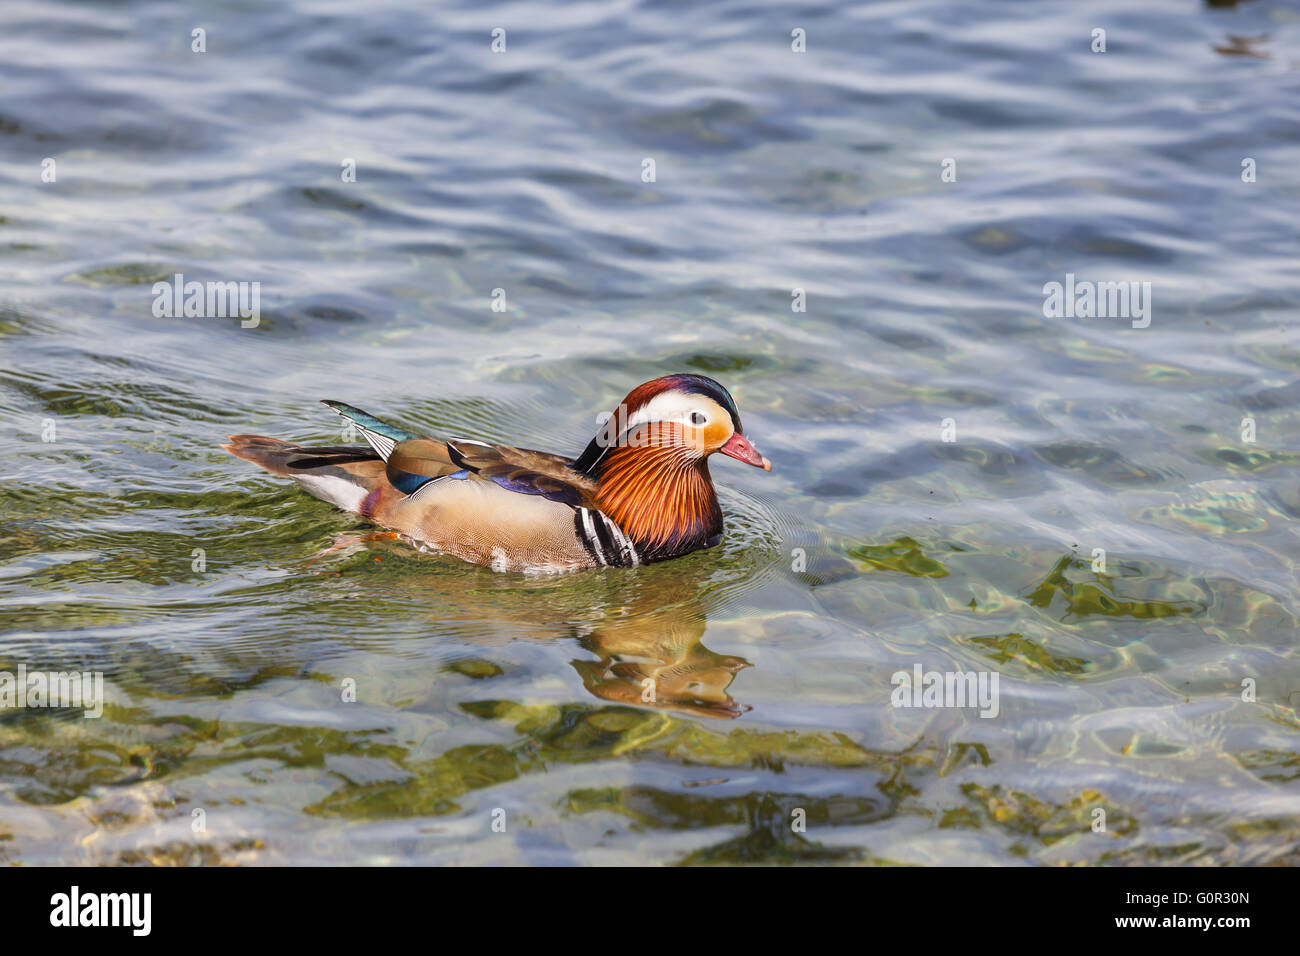 Close up view of a male Mandarin duck floating in water. Stock Photo